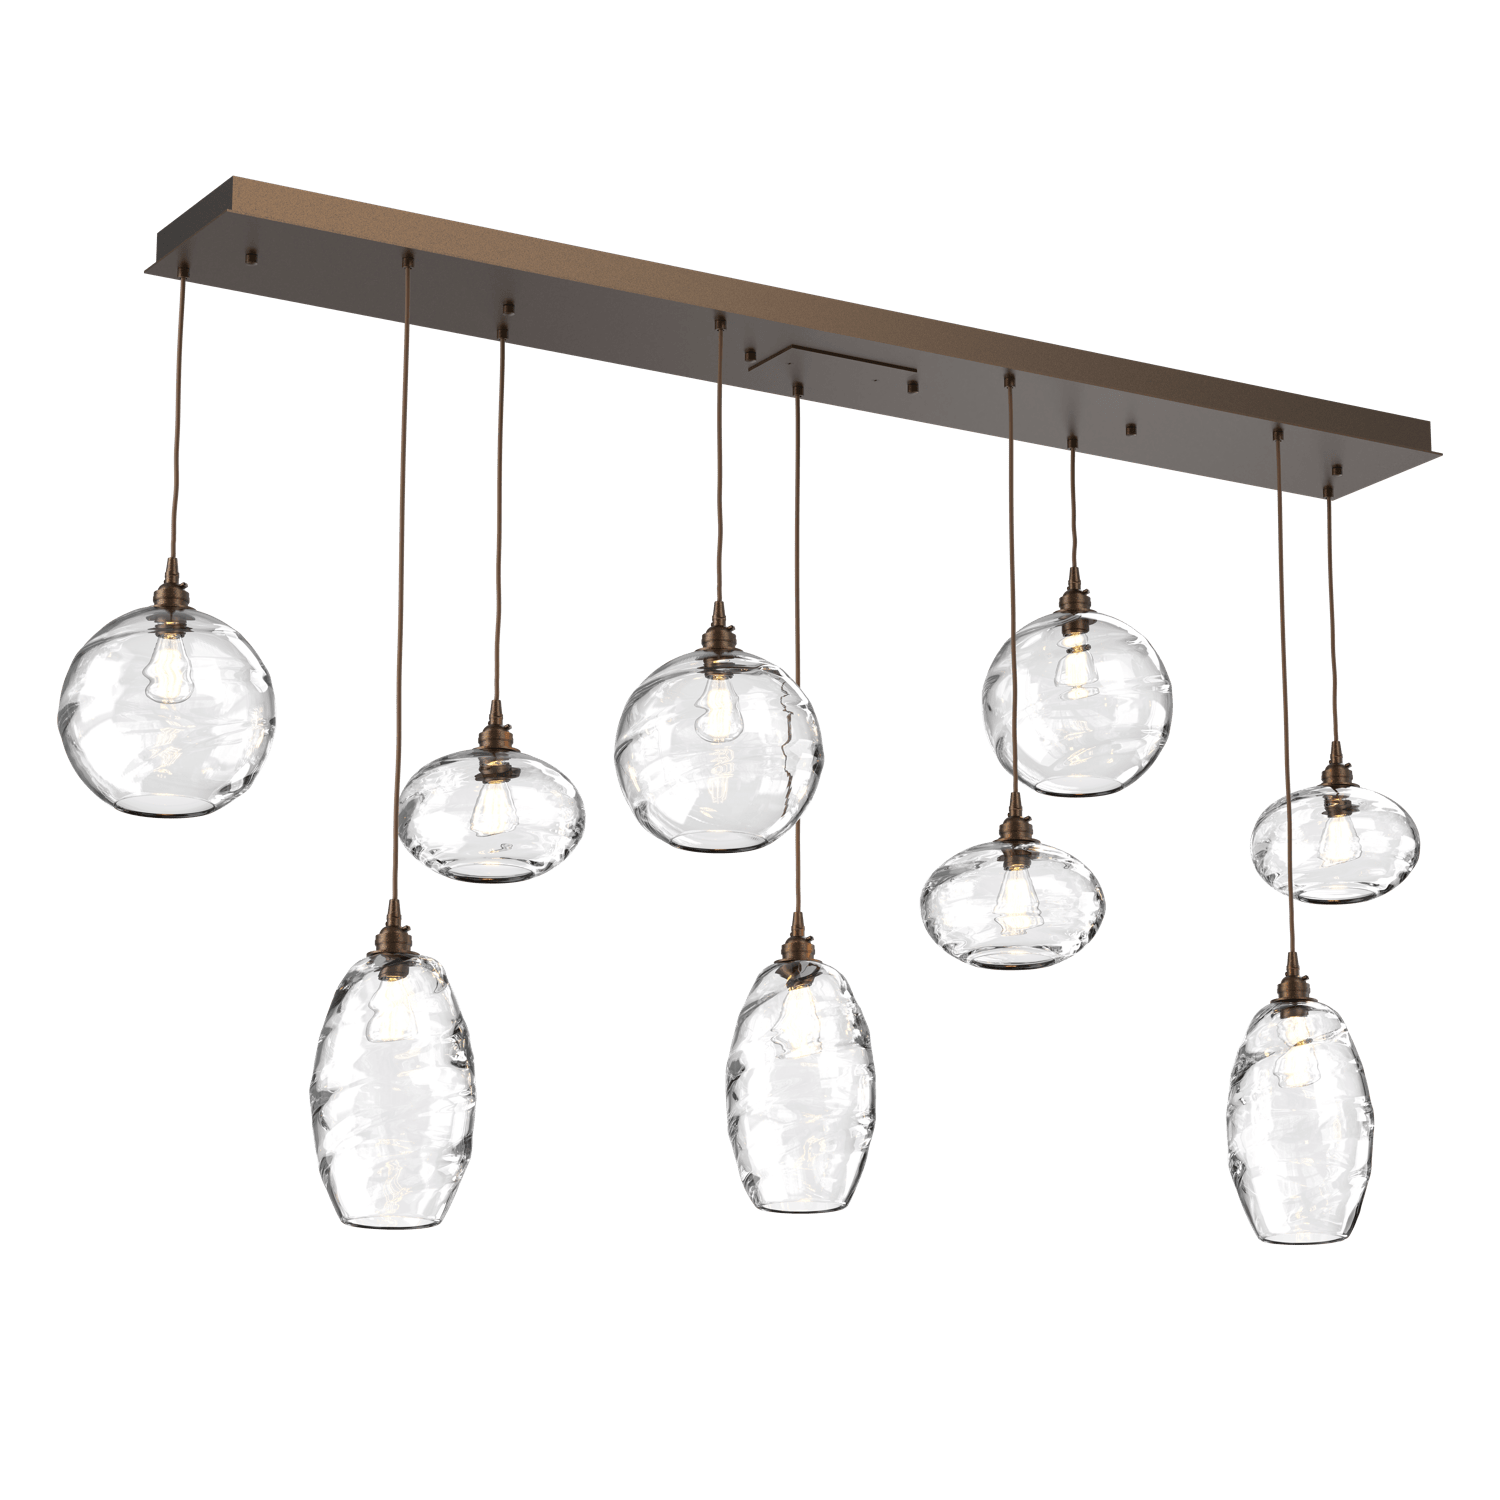 PLB0048-09-FB-OC-Hammerton-Studio-Optic-Blown-Glass-Misto-9-light-linear-pendant-chandelier-with-flat-bronze-finish-and-optic-clear-blown-glass-shades-and-incandescent-lamping